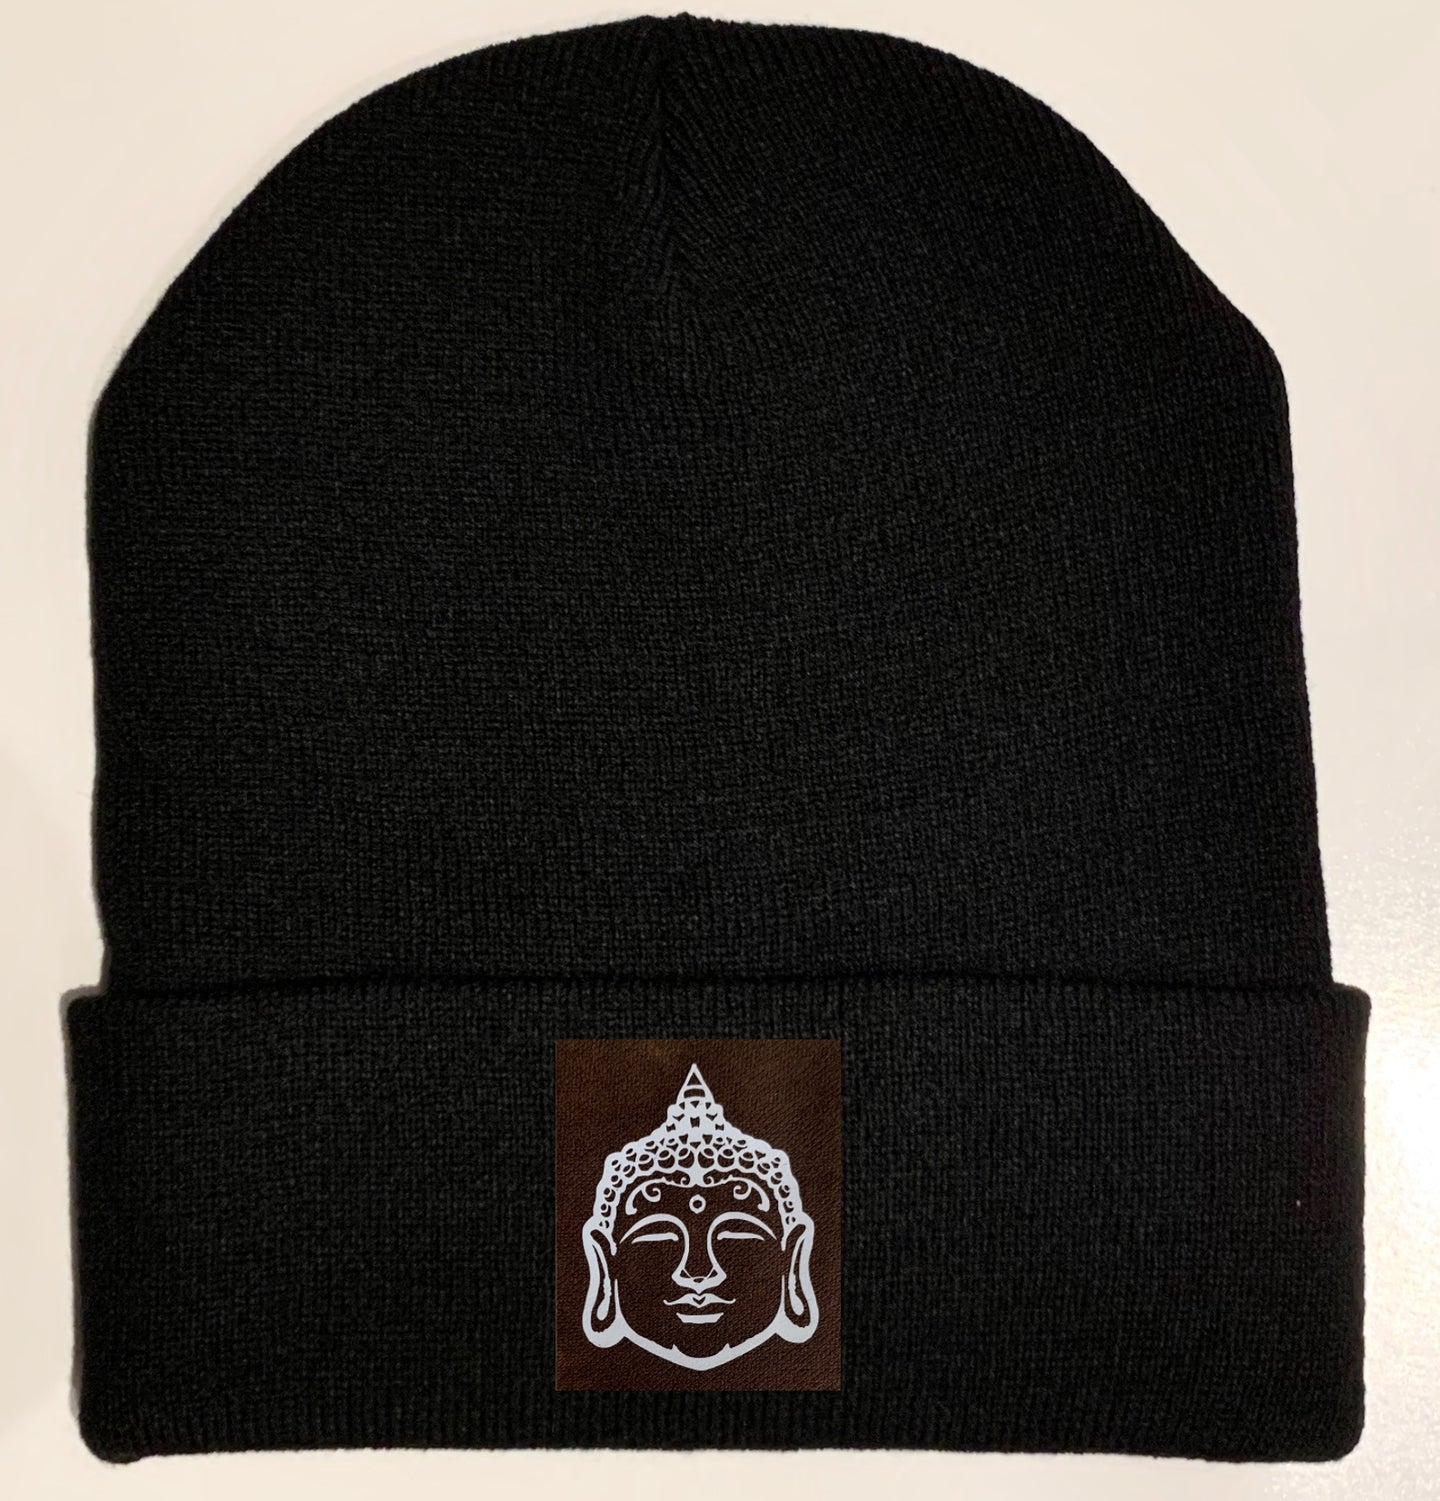 Beanie with “Buddha” means “one who is awake.”